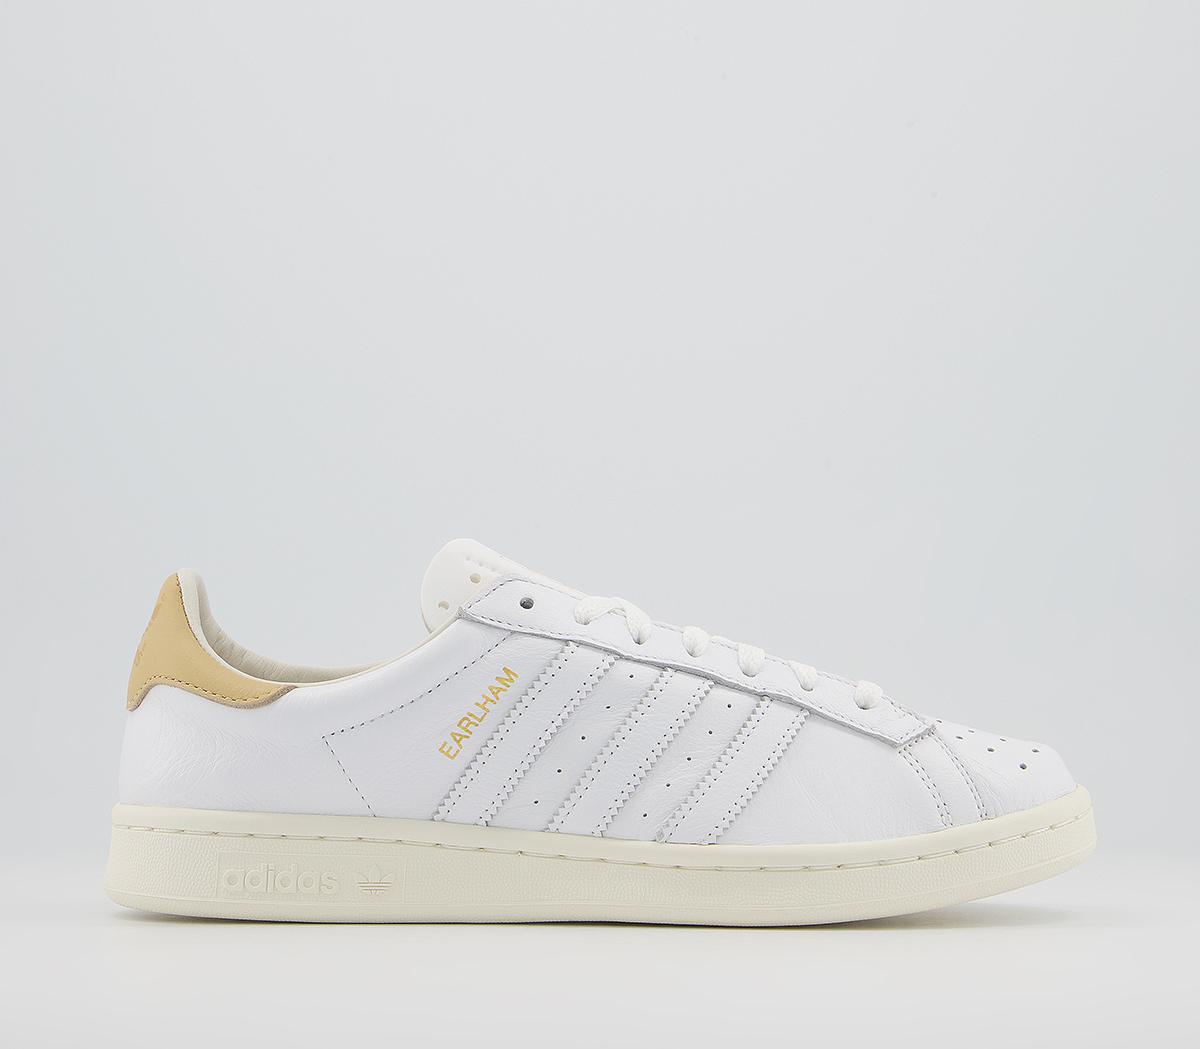 adidasEarlham TrainersWhite Off White Gold